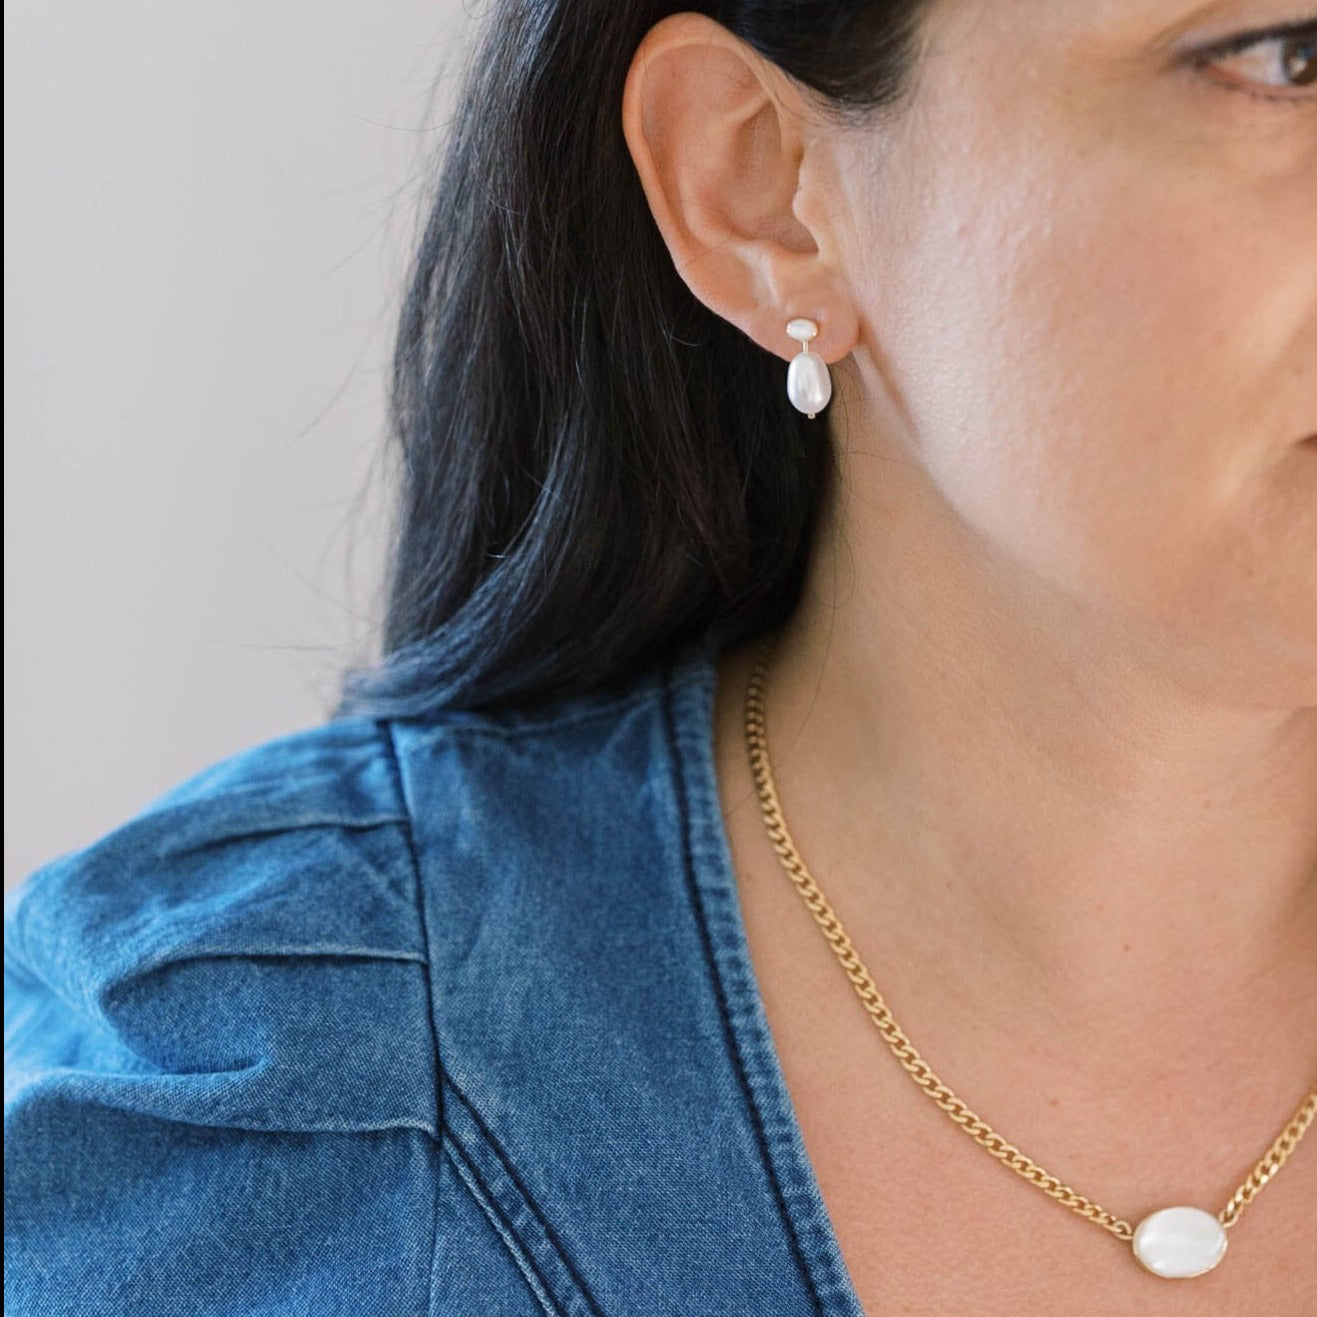 White Pearl drop earrings feature 2 pearls for a minimal modern aesthetic. Great for daily wear.